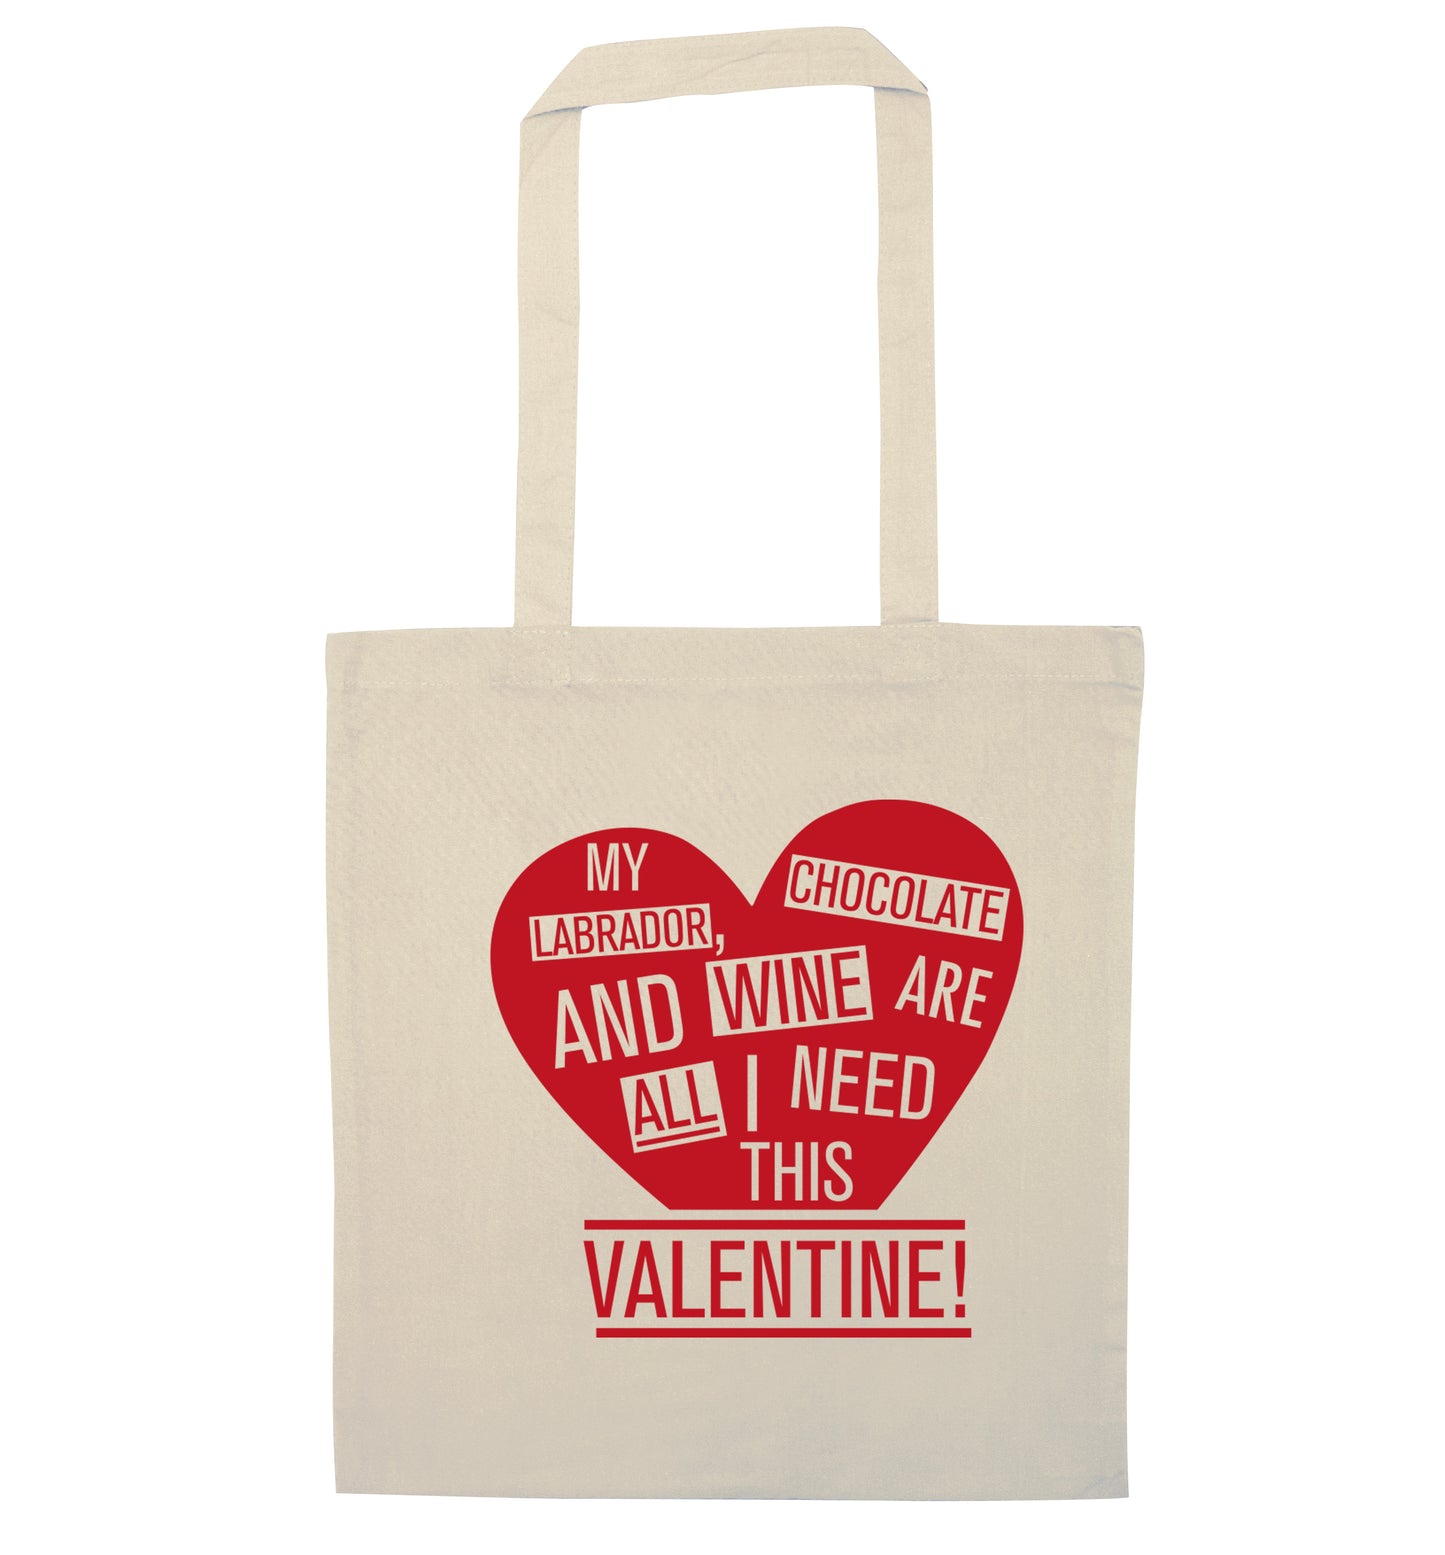 My labrador, chocolate and wine are all I need this valentine! natural tote bag